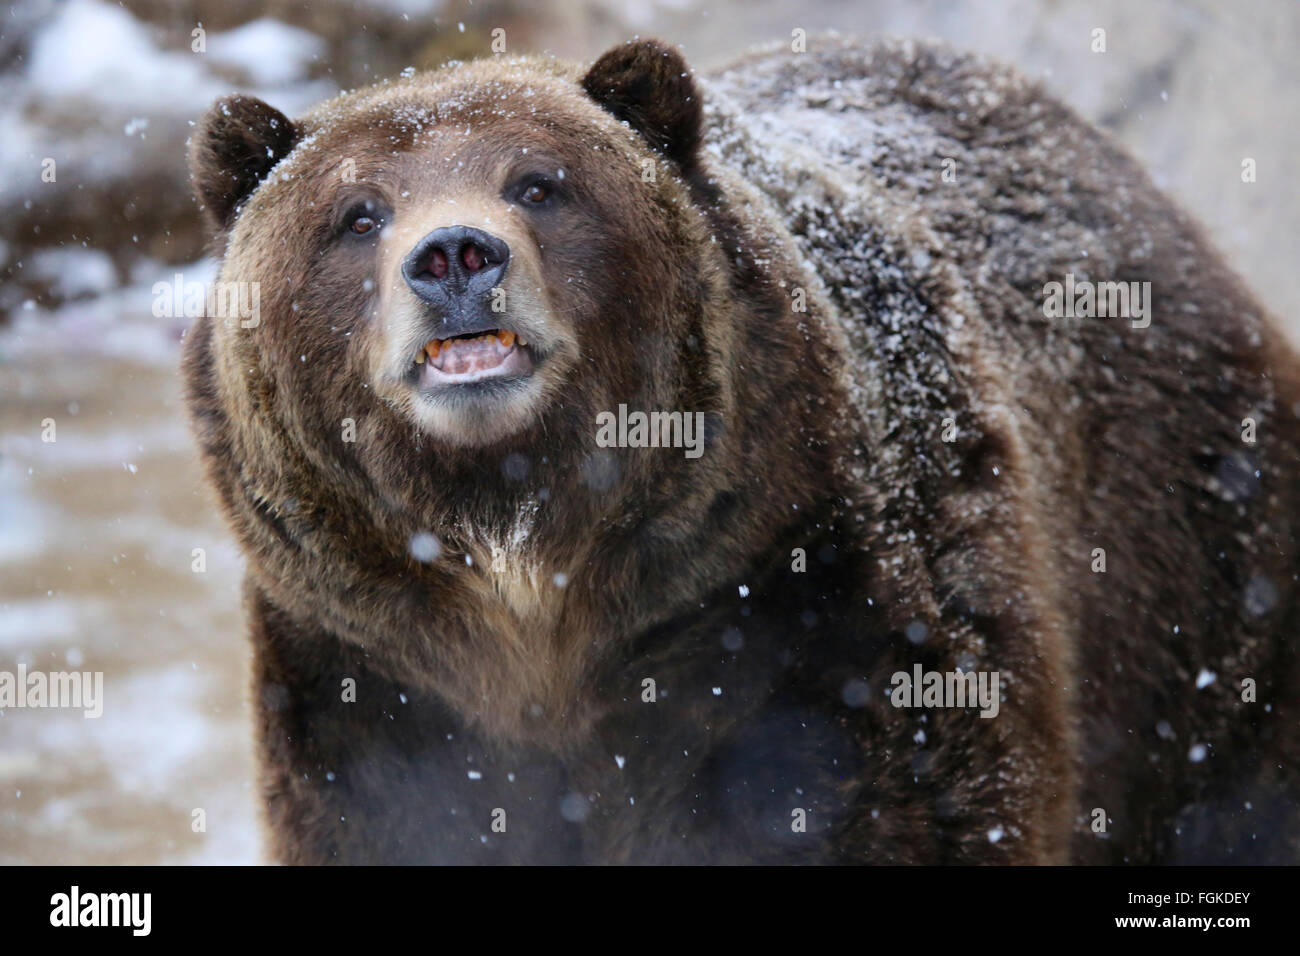 Grizzly bear close up in snow Stock Photo